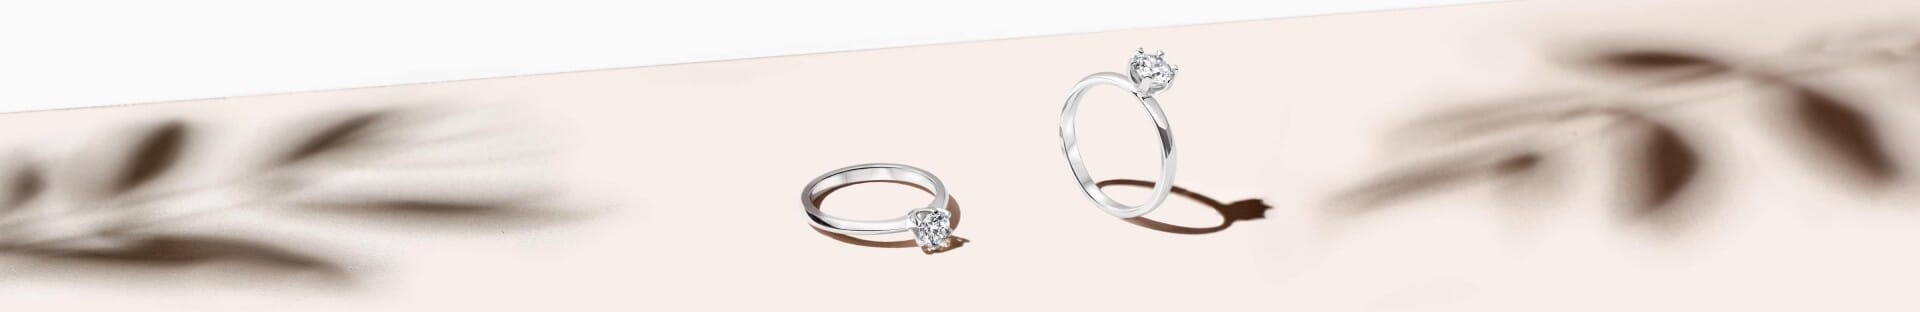 Solitaire rings: classic proposal rings Banner